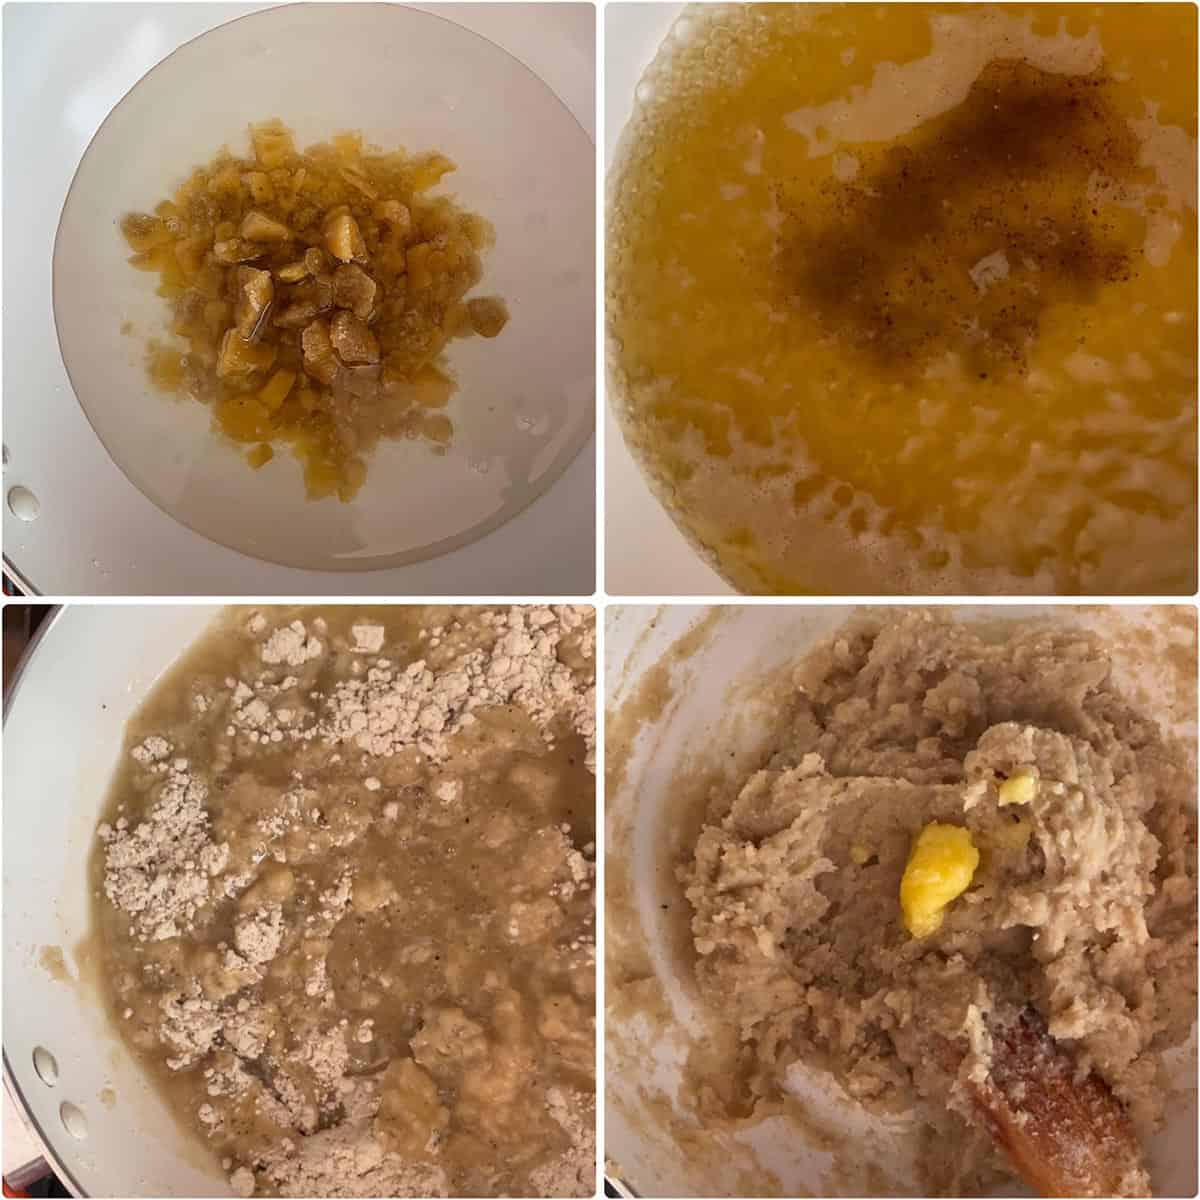 Melting jaggery in water and adding sorghum flour